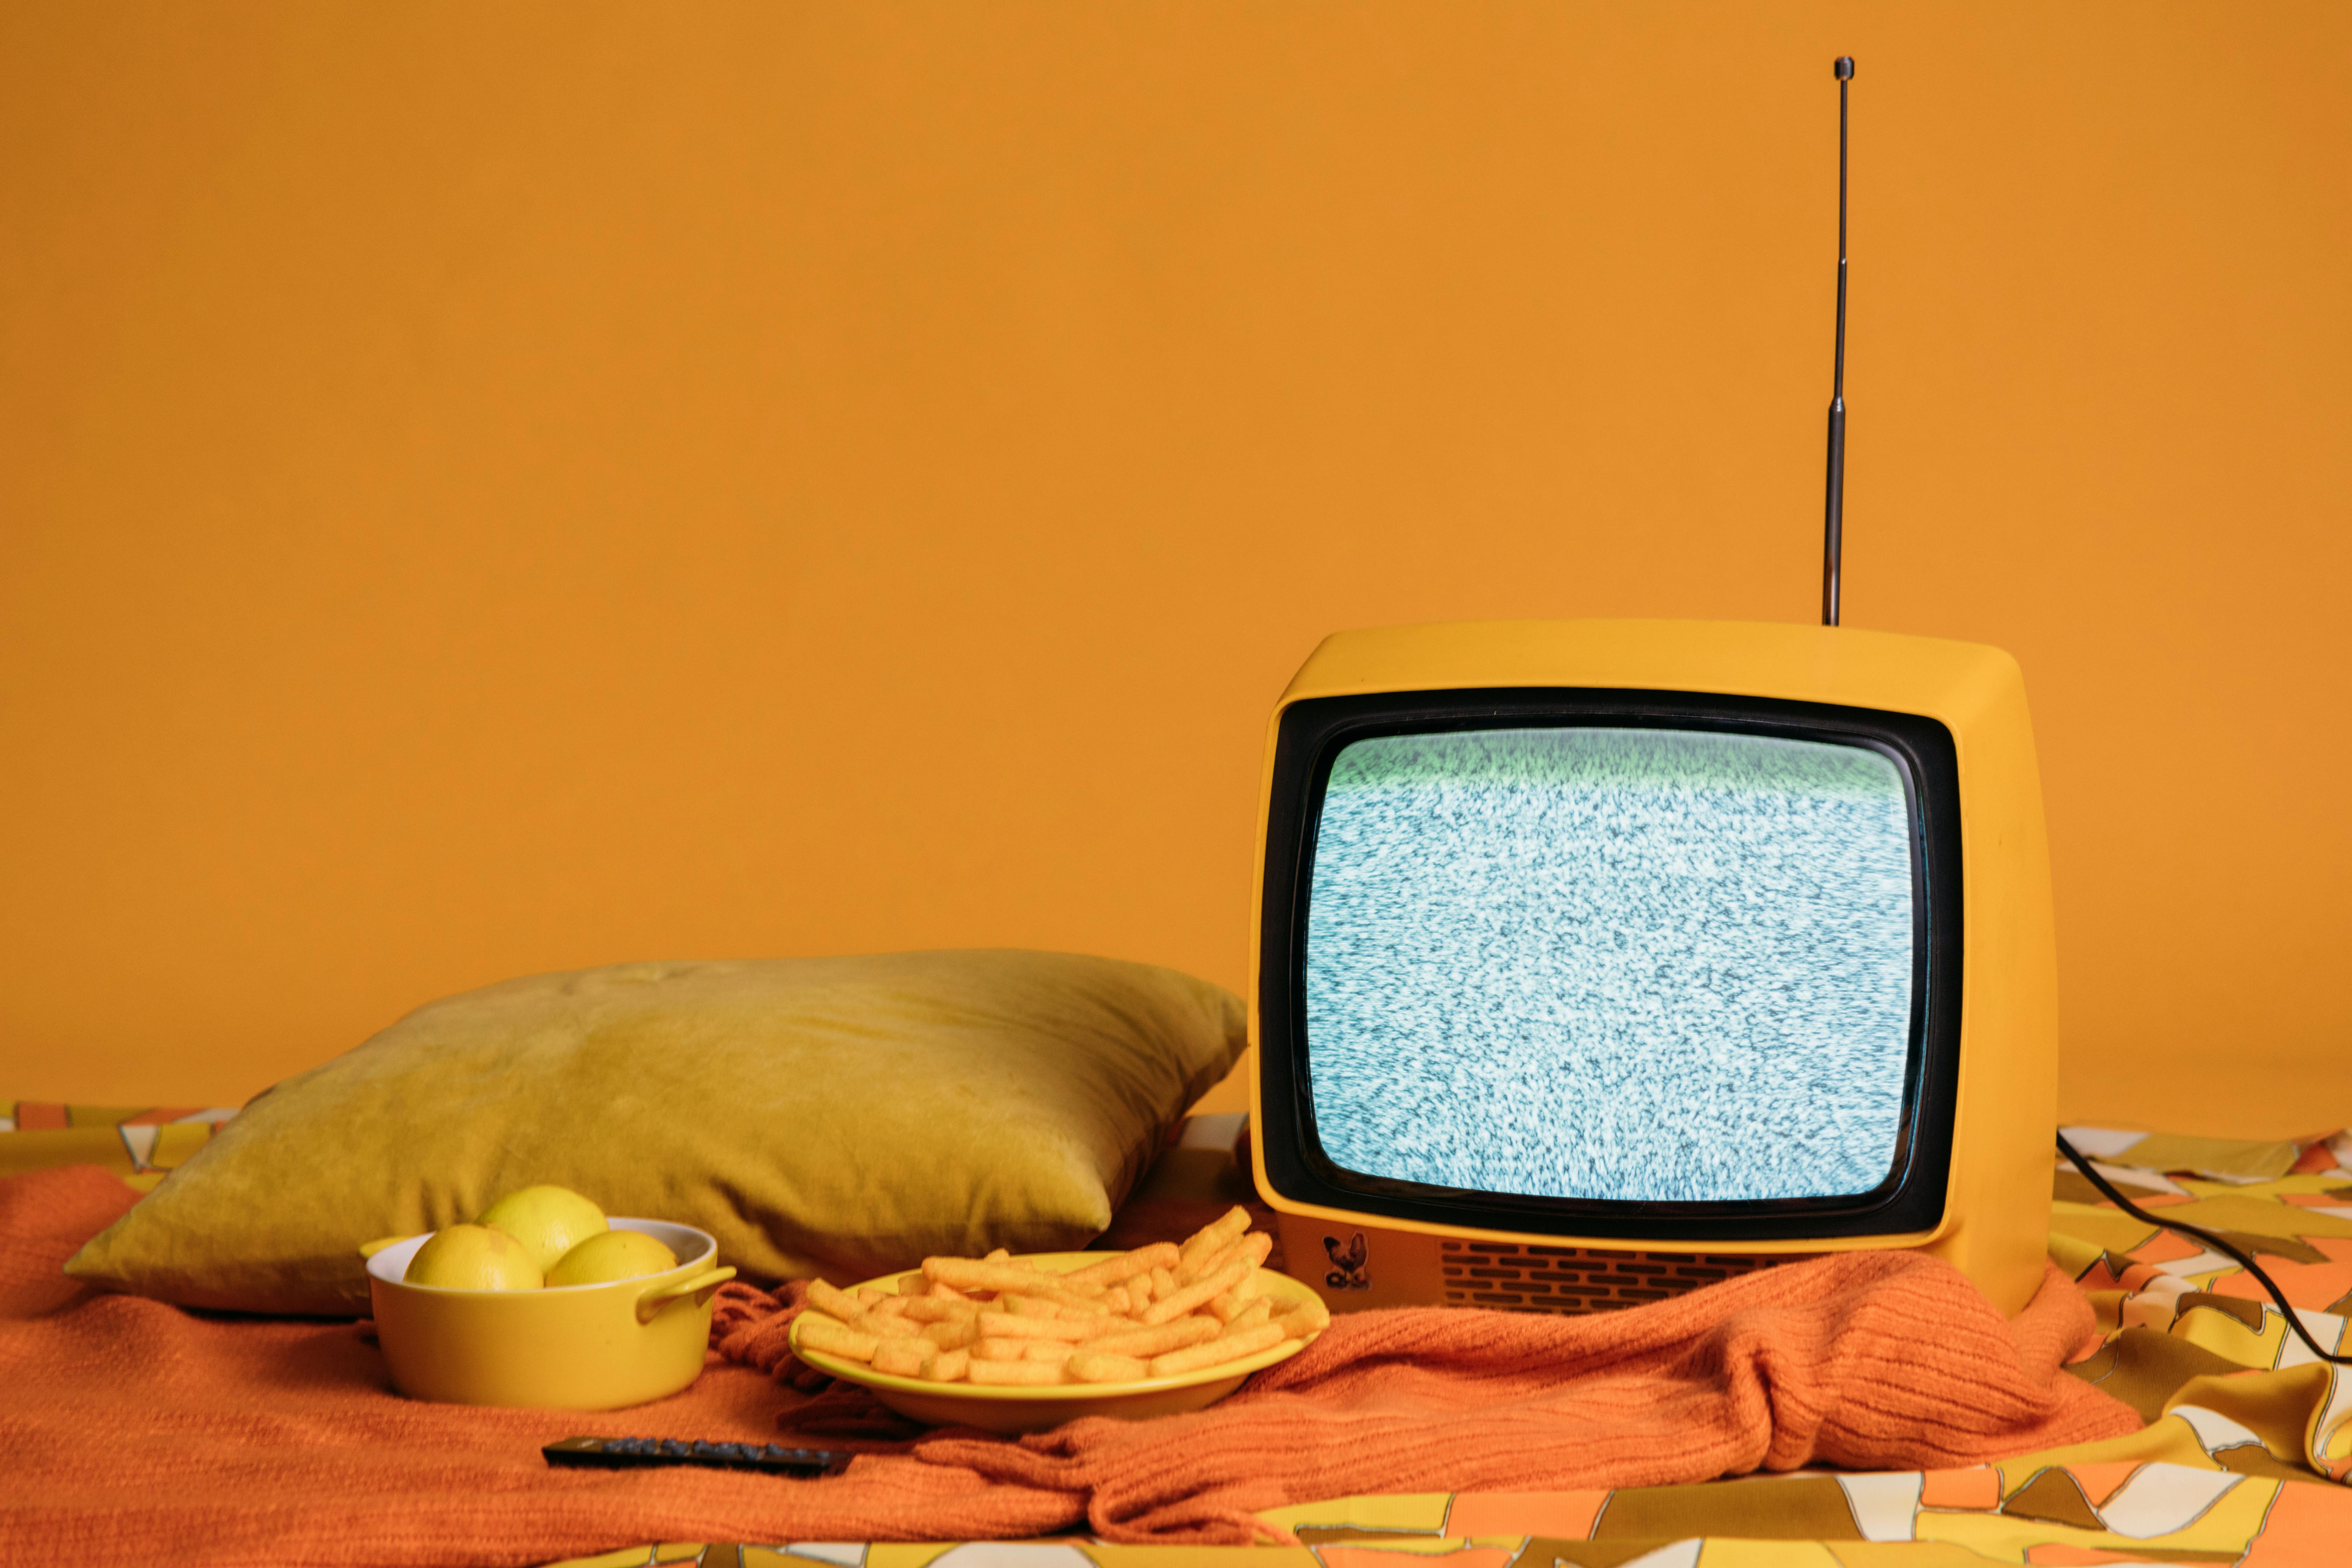 Does watching TV help with panic attacks?